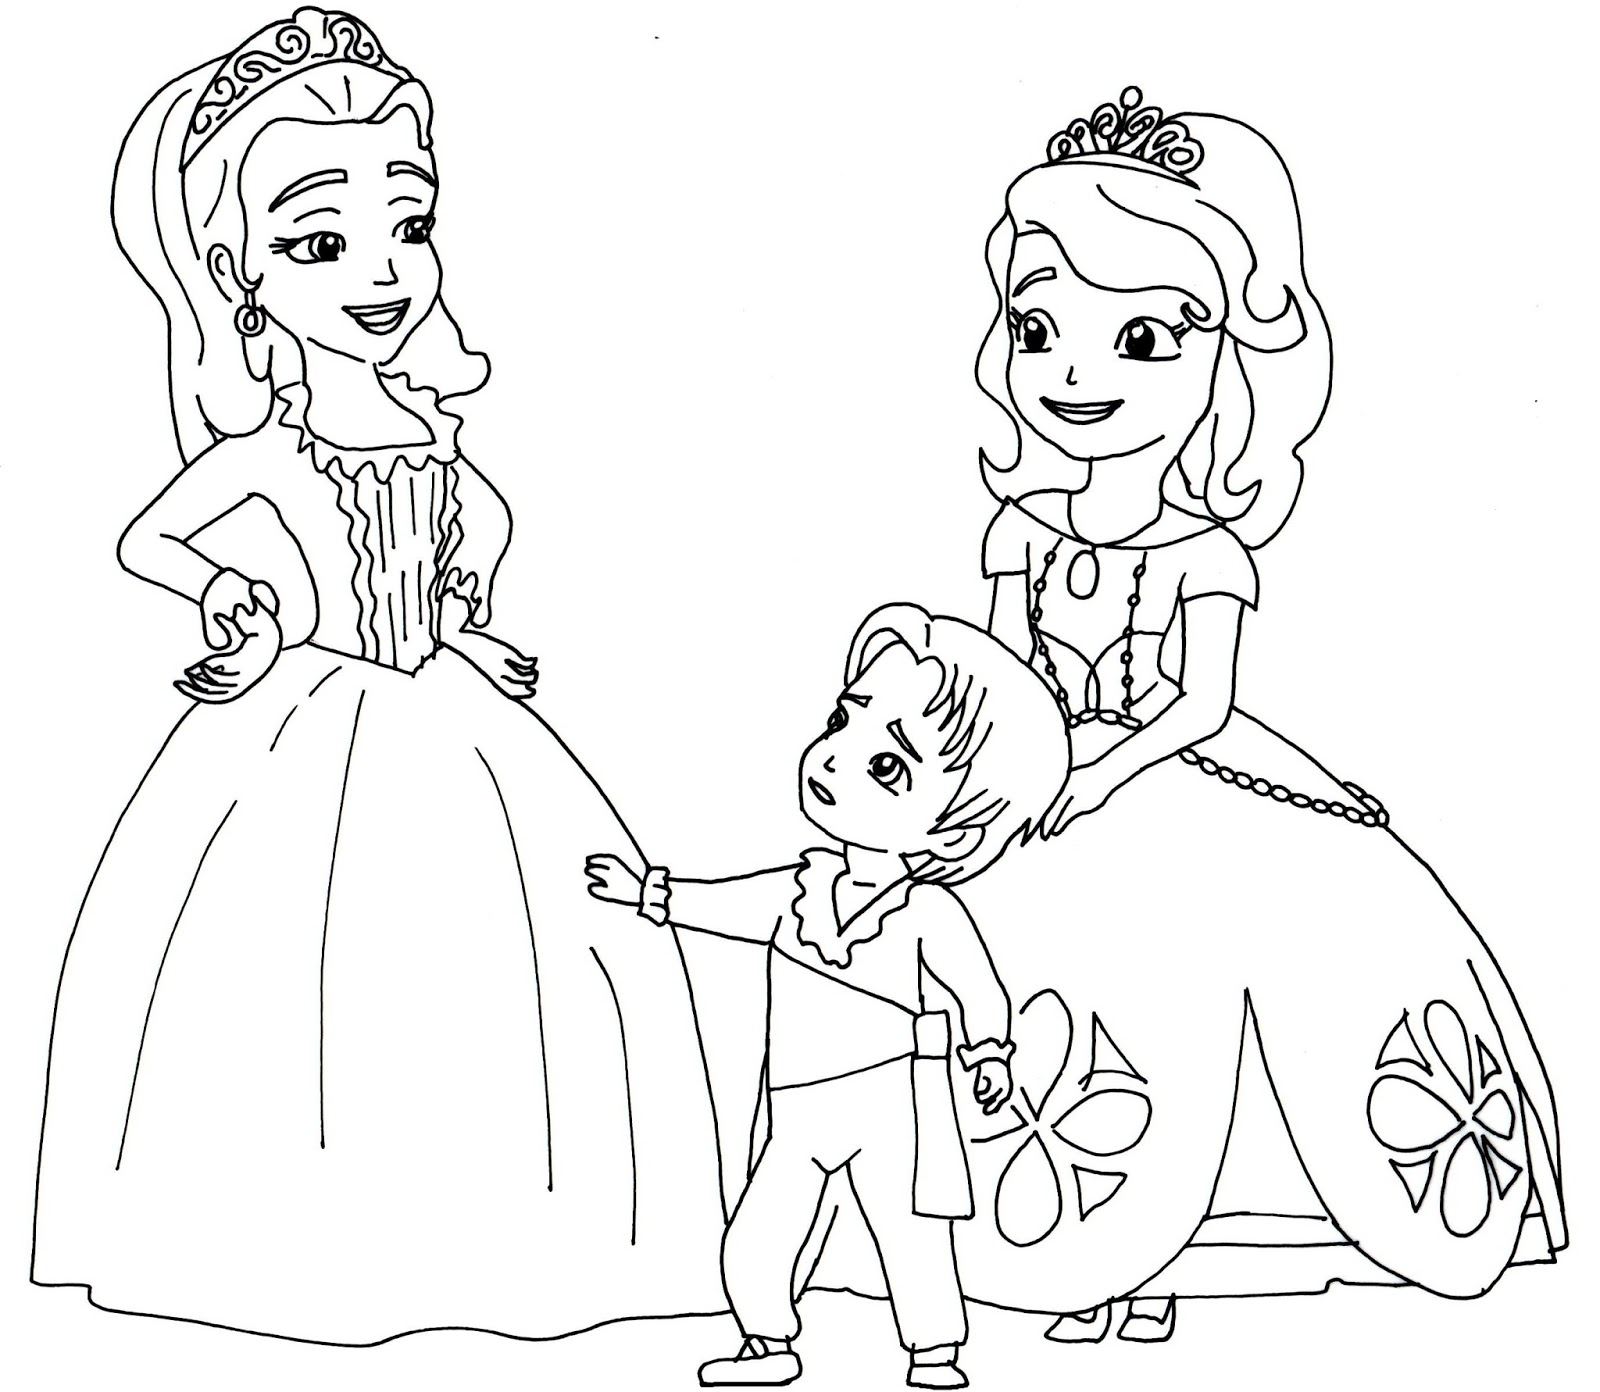 Sofia The First Disney Princess Coloring Pages at GetDrawings | Free ...